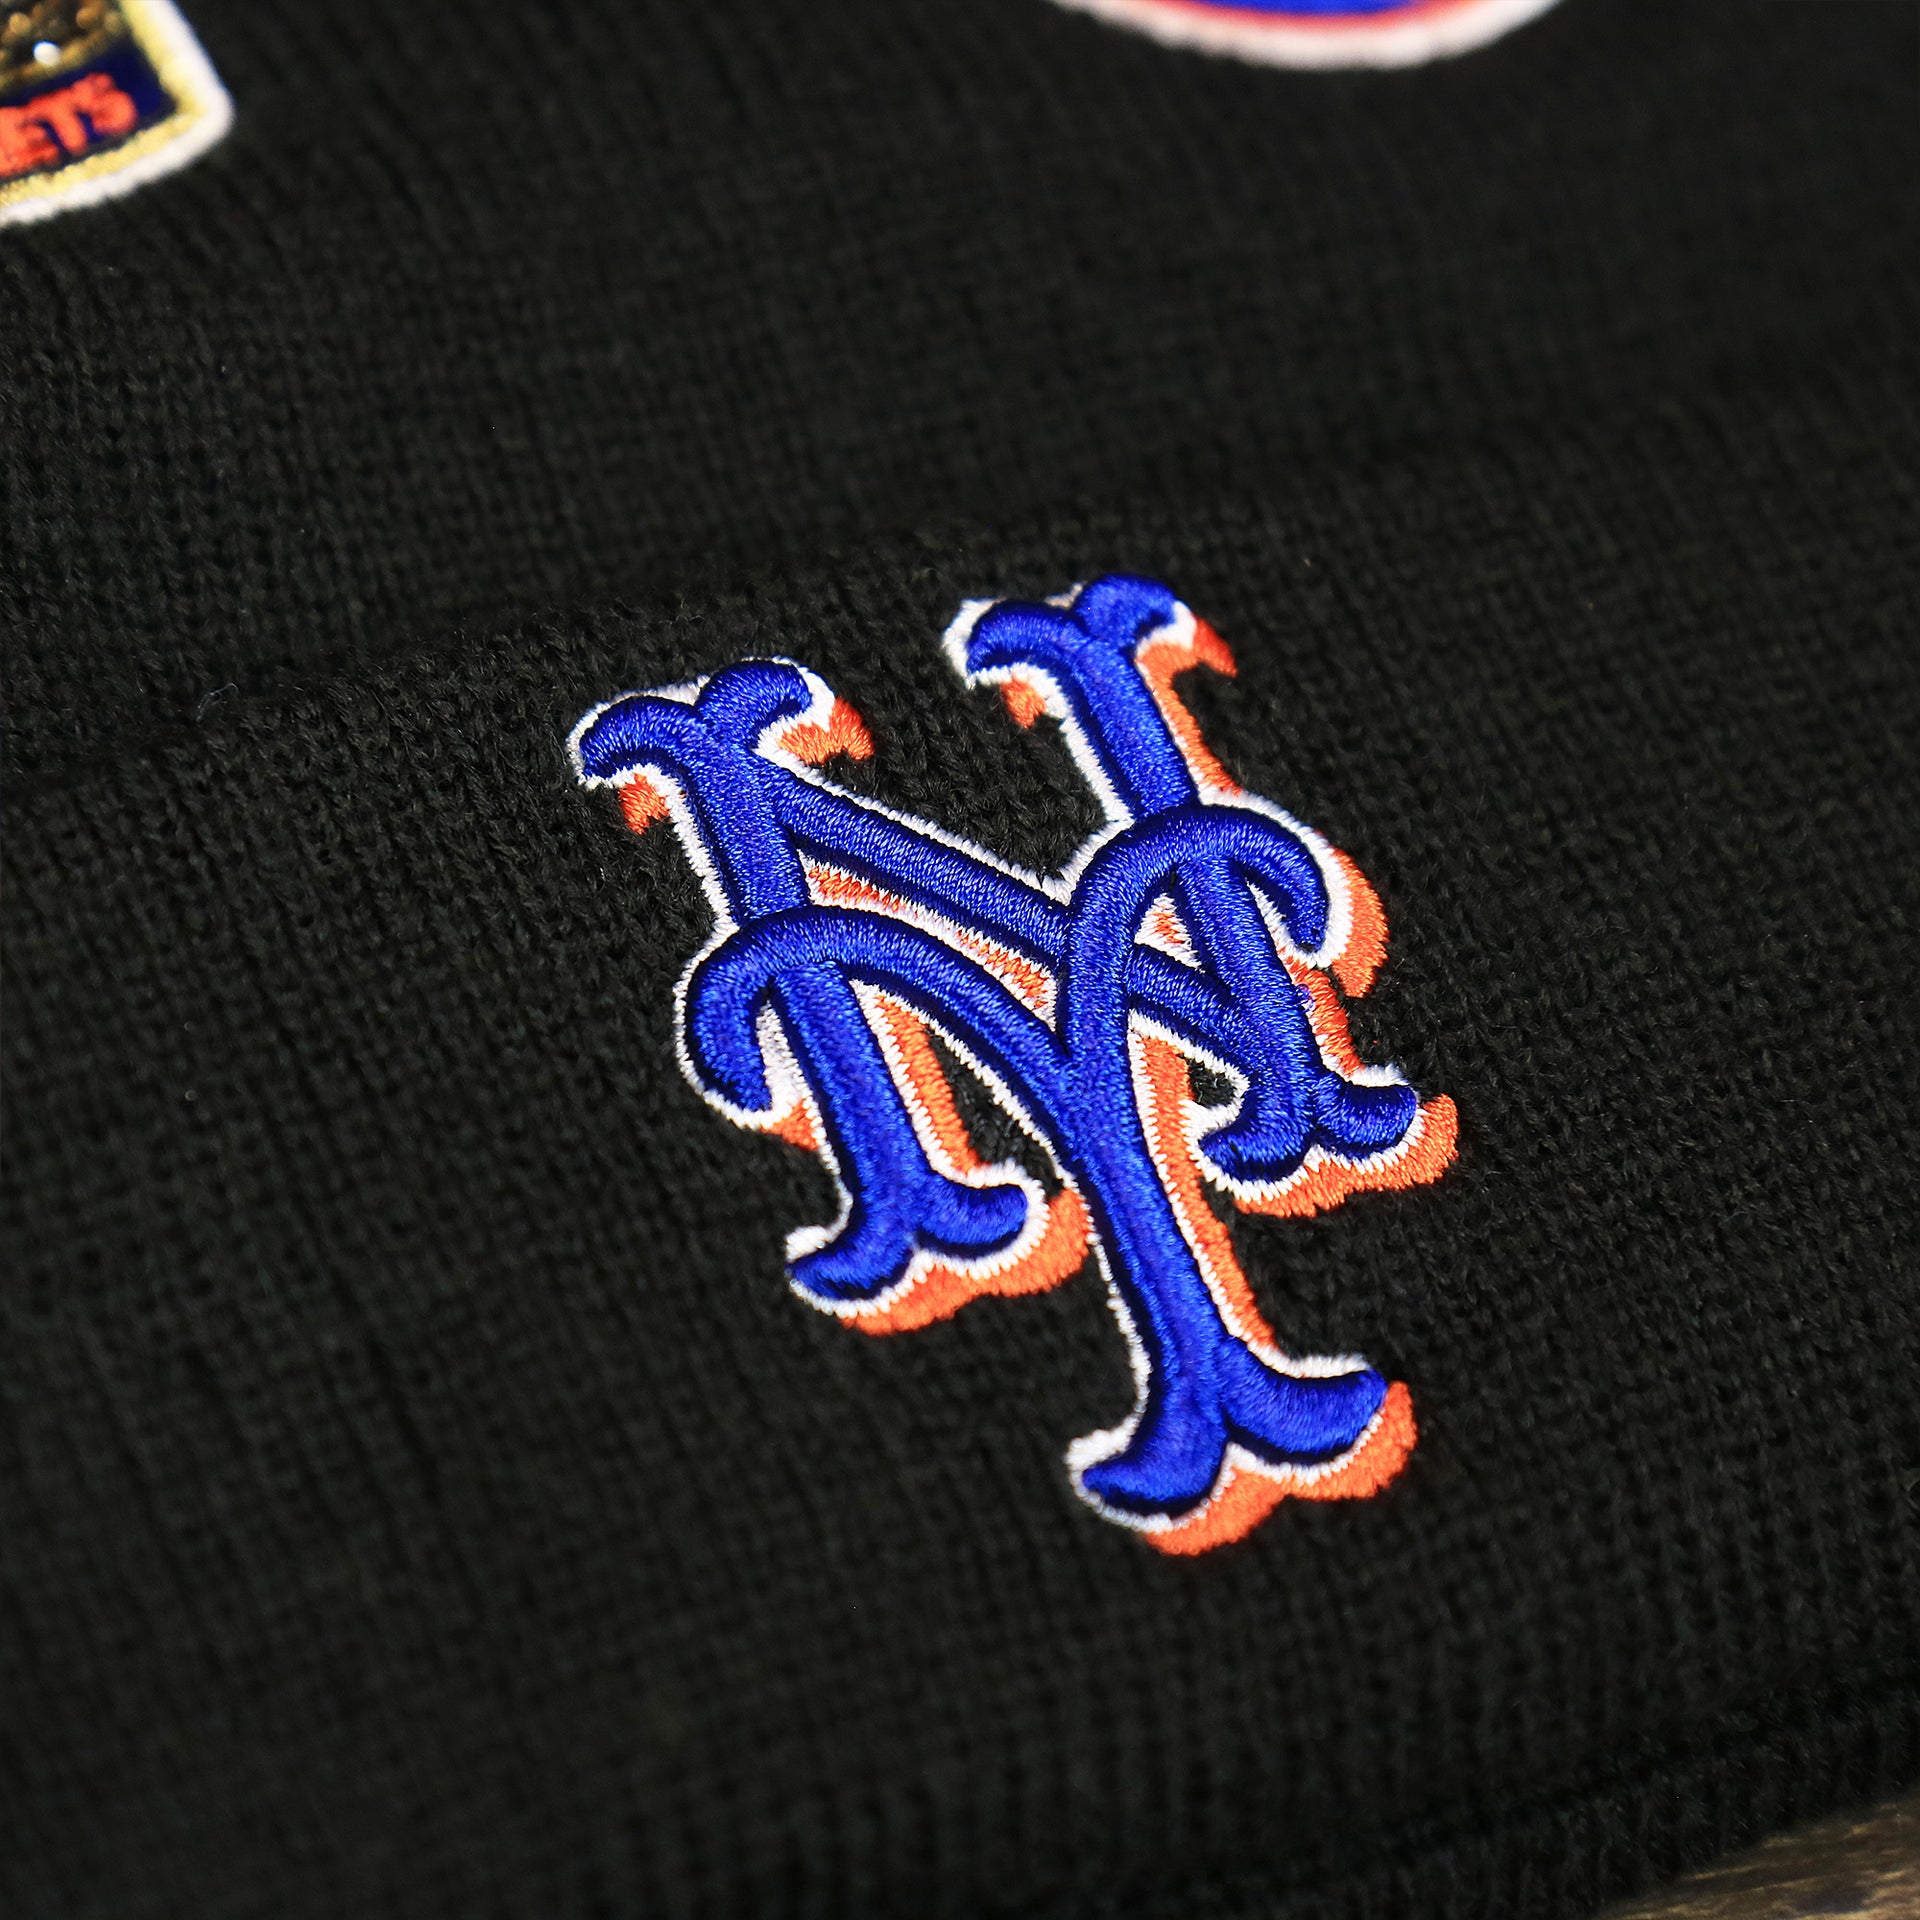 The Mets Logo on the New York Mets All Over World Series Side Patch 2x Champion Knit Cuff Beanie | New Era, Black